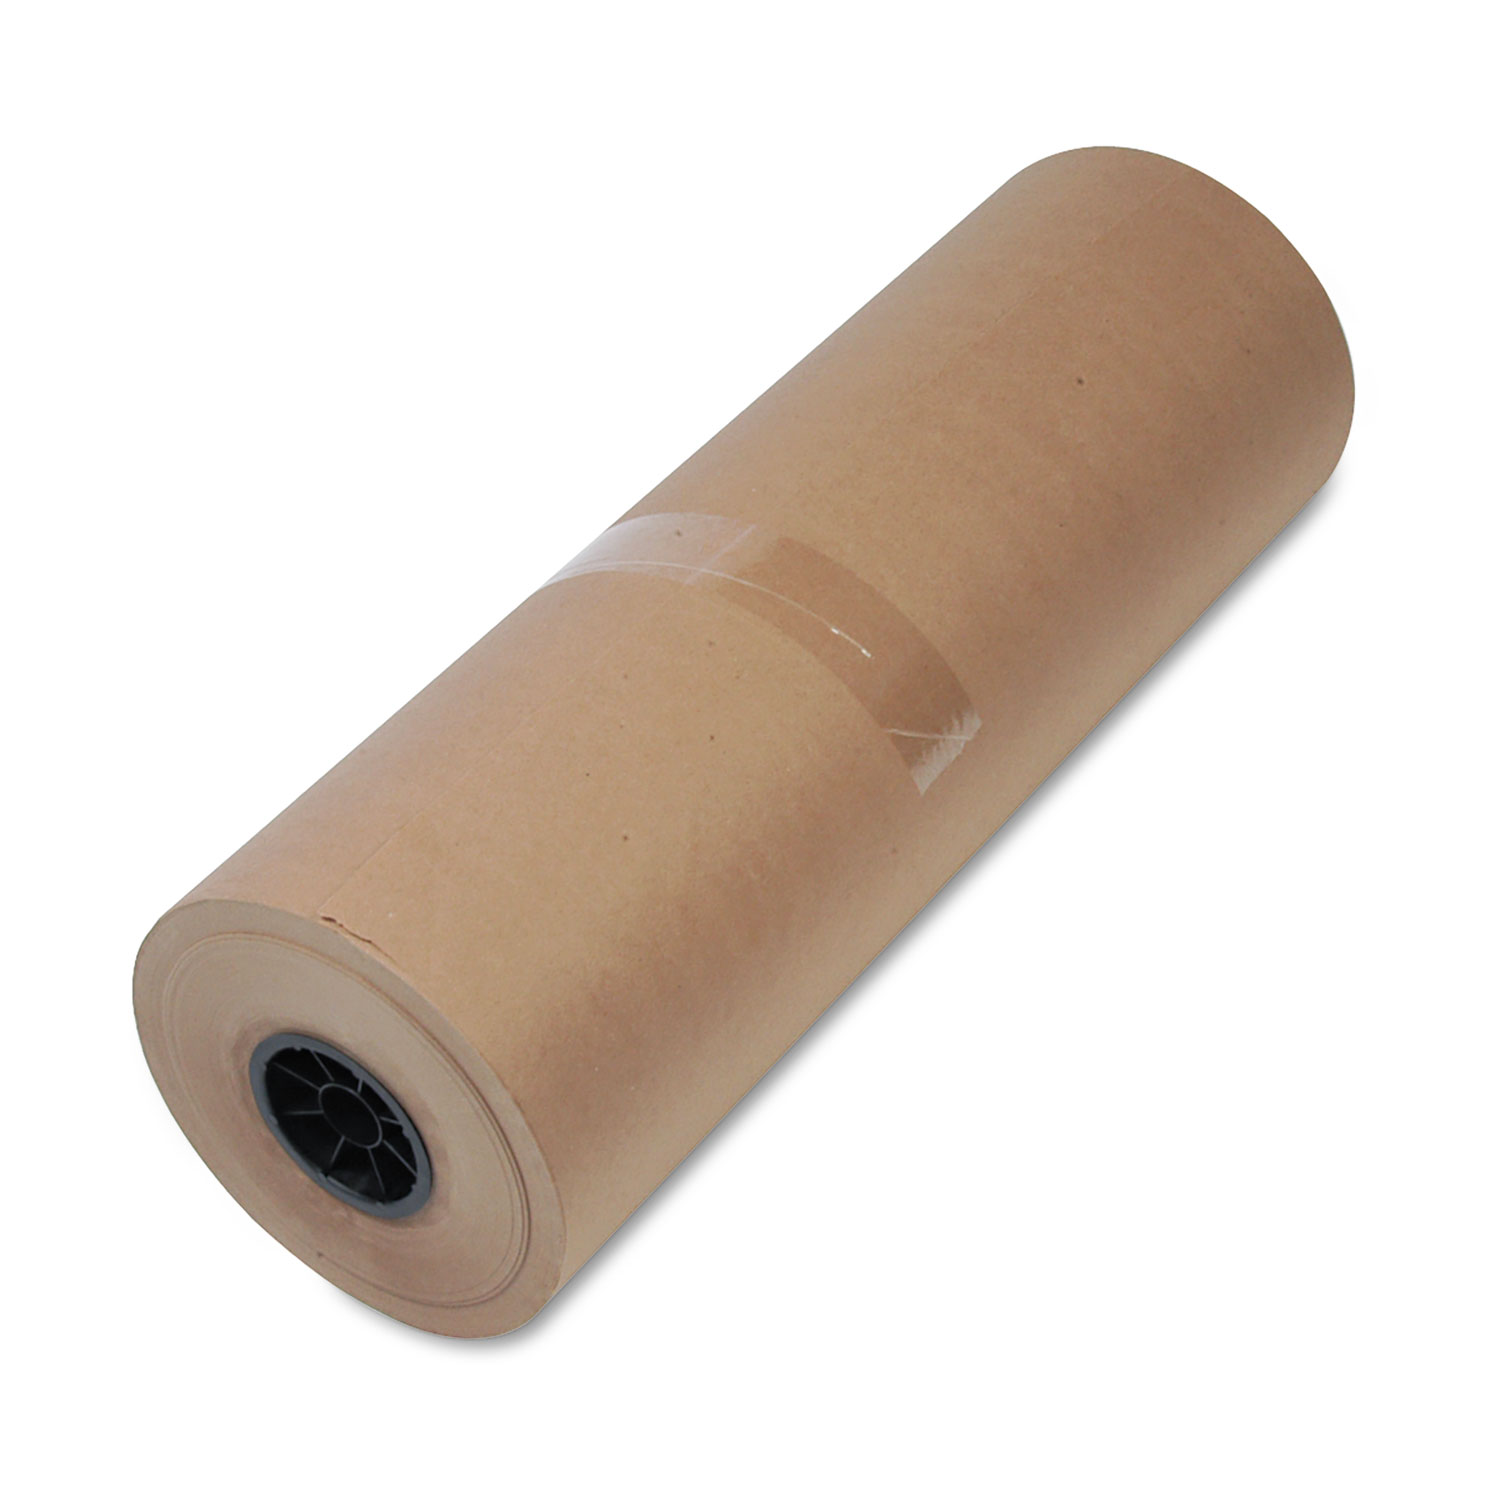  General Supply UFS1300022 High-Volume Wrapping Paper, 40lb, 24w, 900'l, Brown (UFS1300022) 